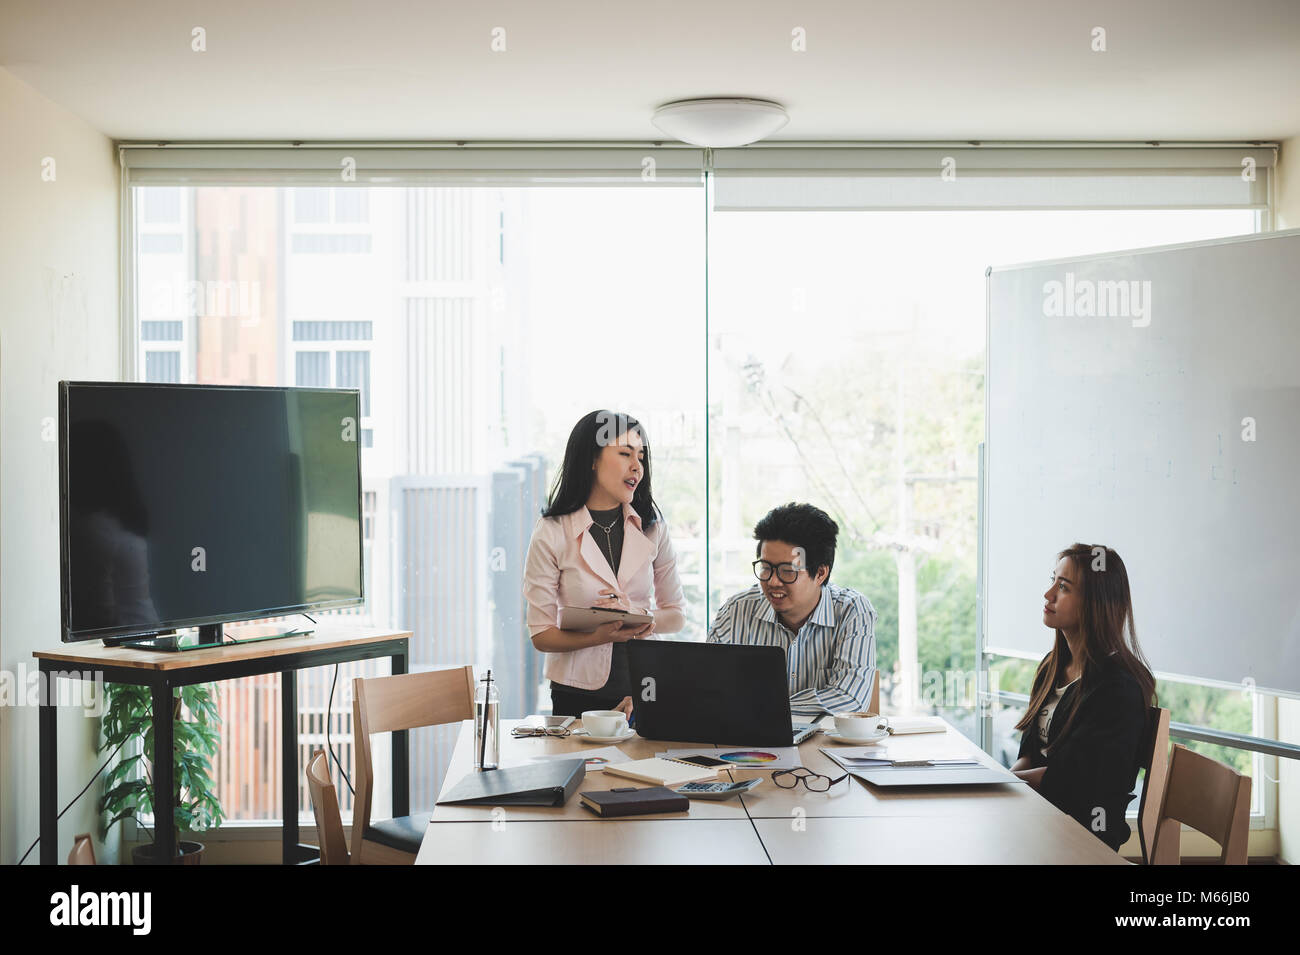 Young Asian businessman and businesswoman talking about their work in meeting room. Business team discussion planning and brainstorm in office conept. Stock Photo